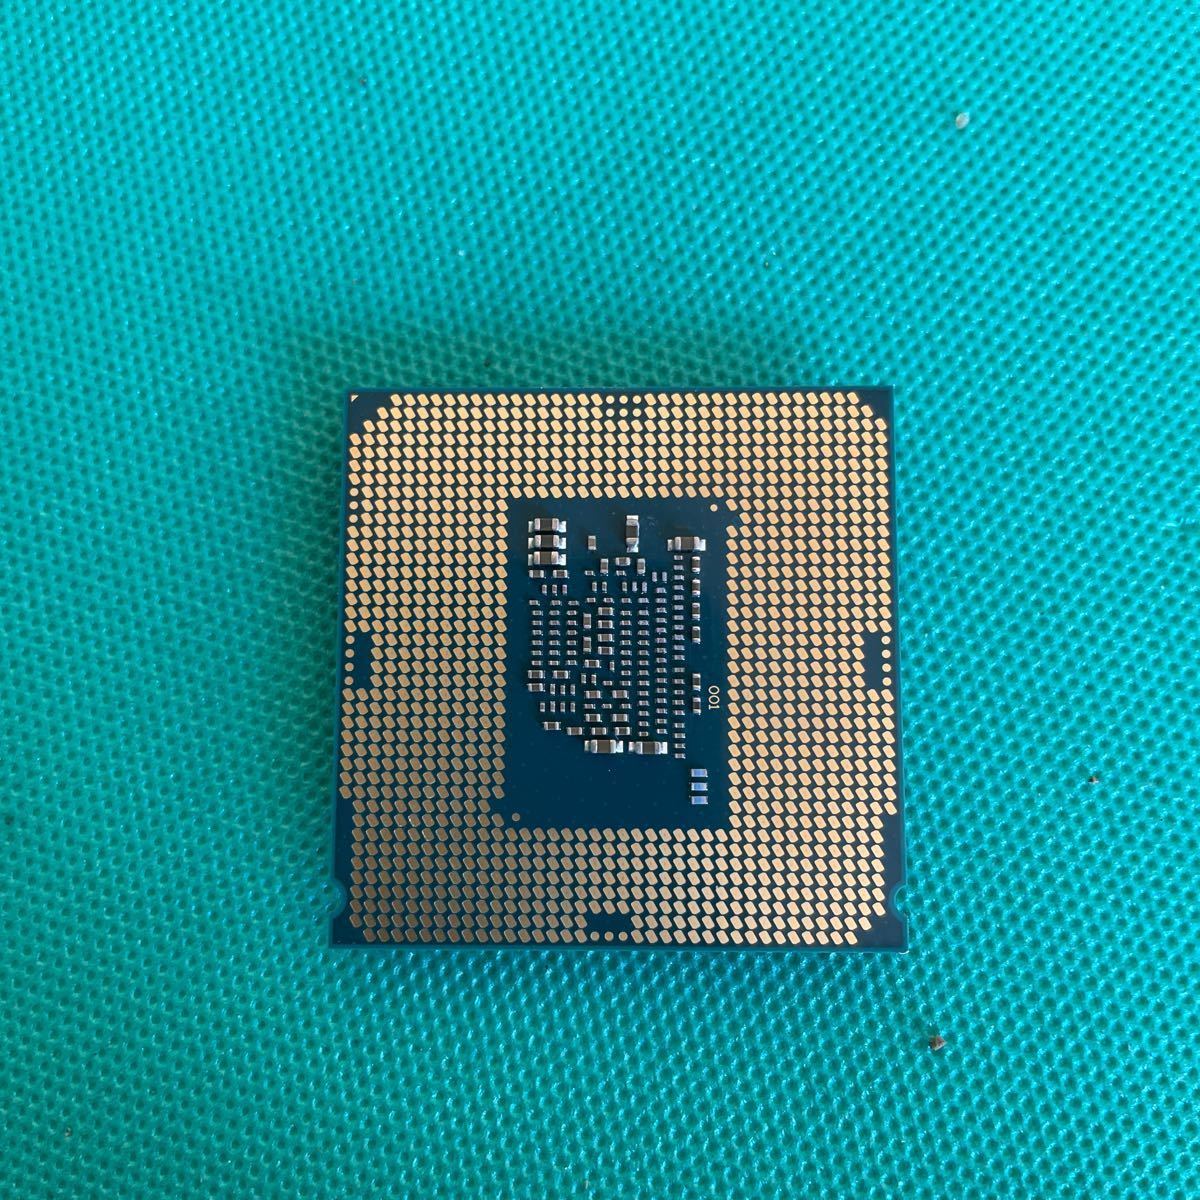 QW2941 Intel Core i3-6100 secondhand goods operation middle. PC from out did thing 